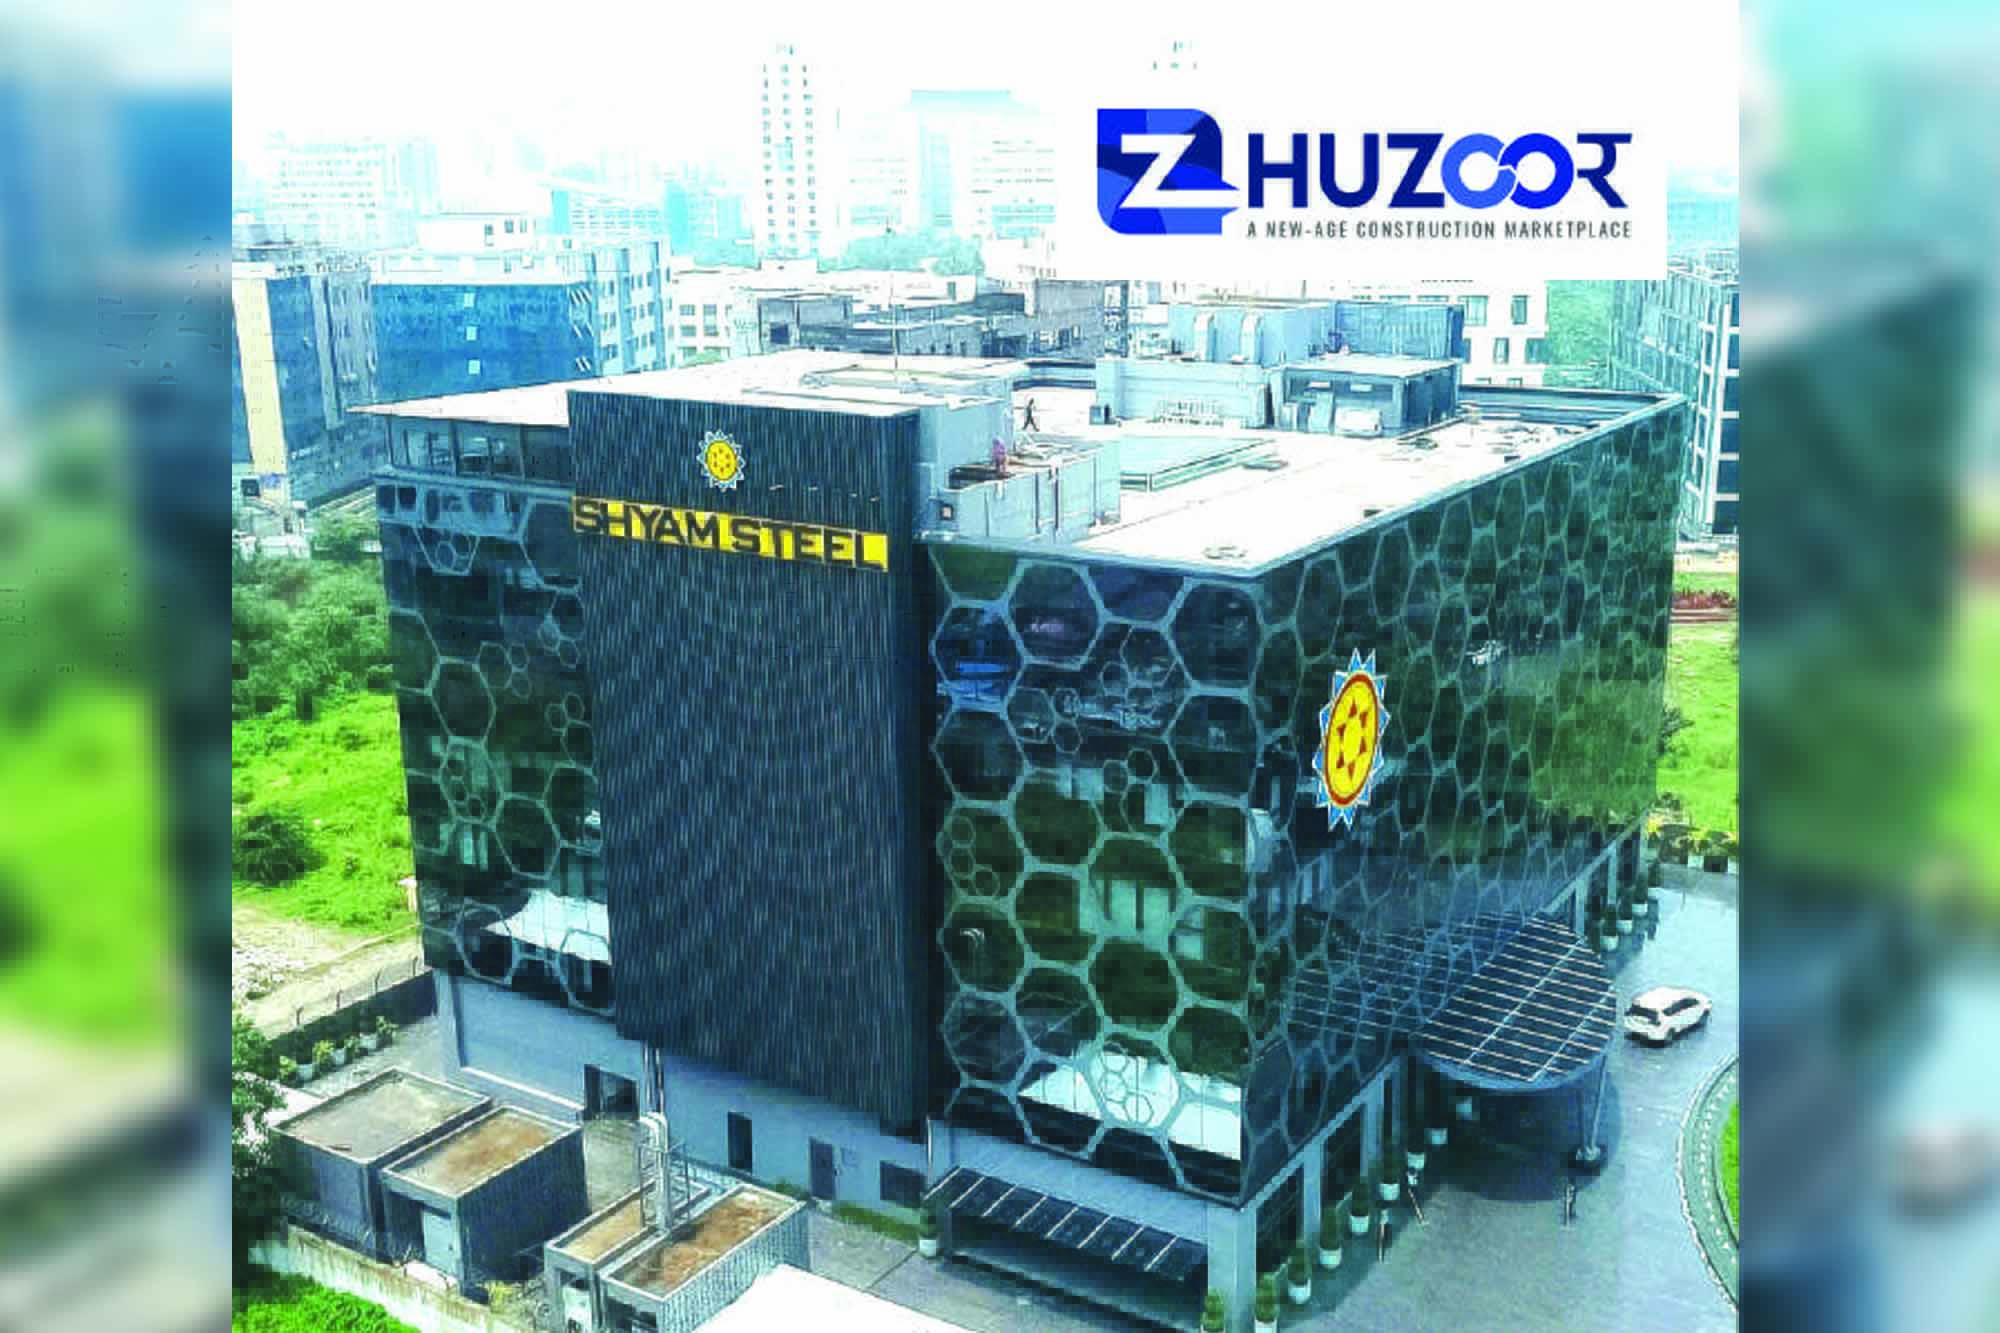 Zhuzoor Infratech is at the forefront of transforming material procurement as the construction sector experiences fast expansion and development. By combining various building supplies under one roof, Zhuzoor, which has roots in the well-known Shyam Steel Group, has quickly established a name.